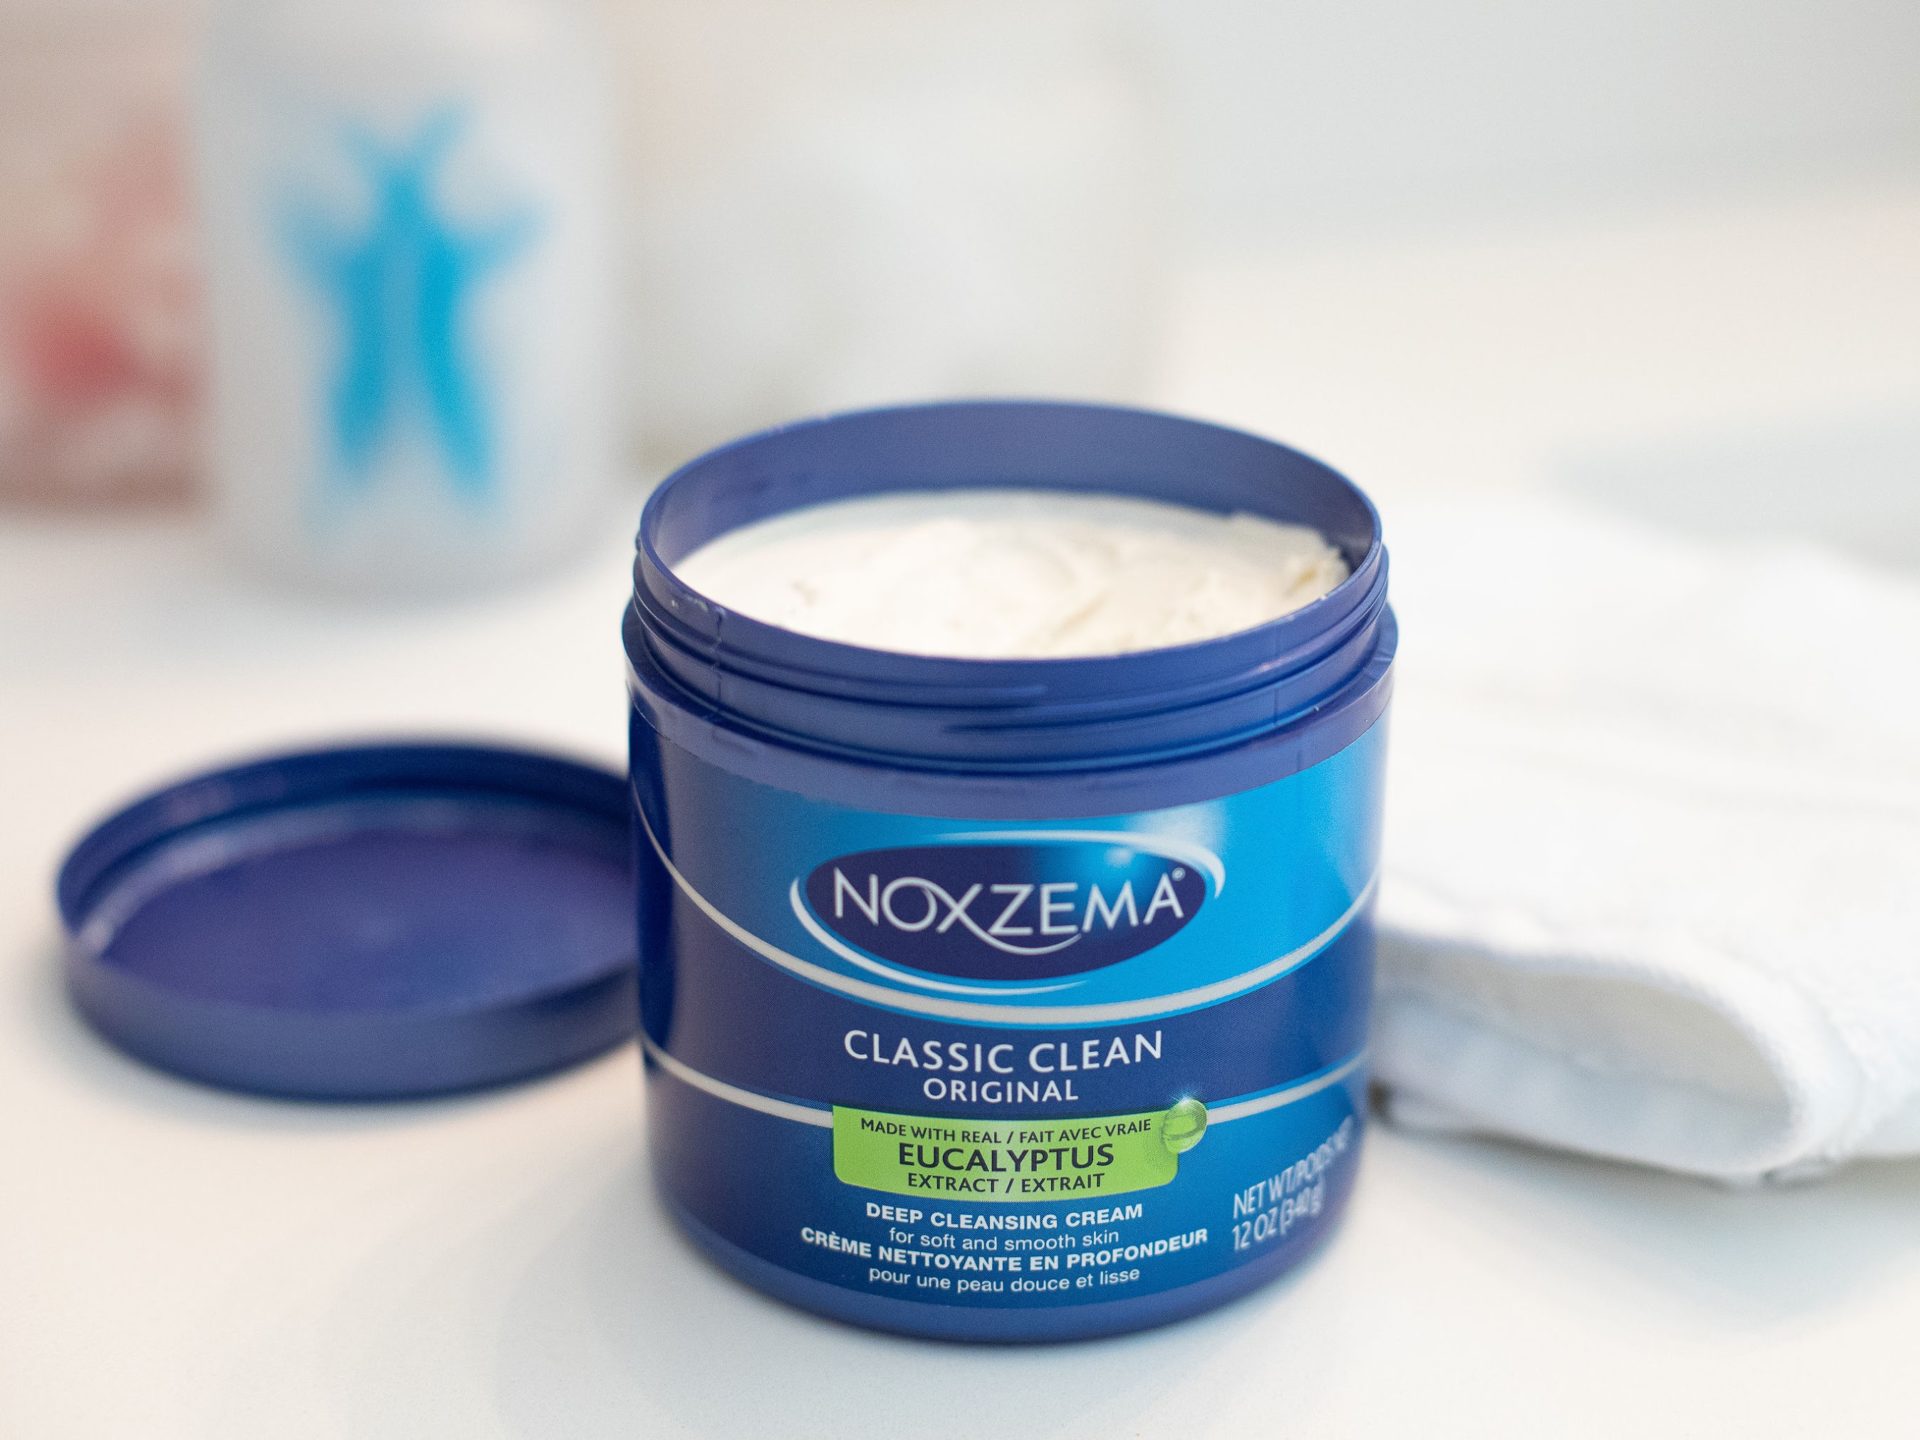 Noxzema Cleansing Cream As Low As $2.99 At Kroger